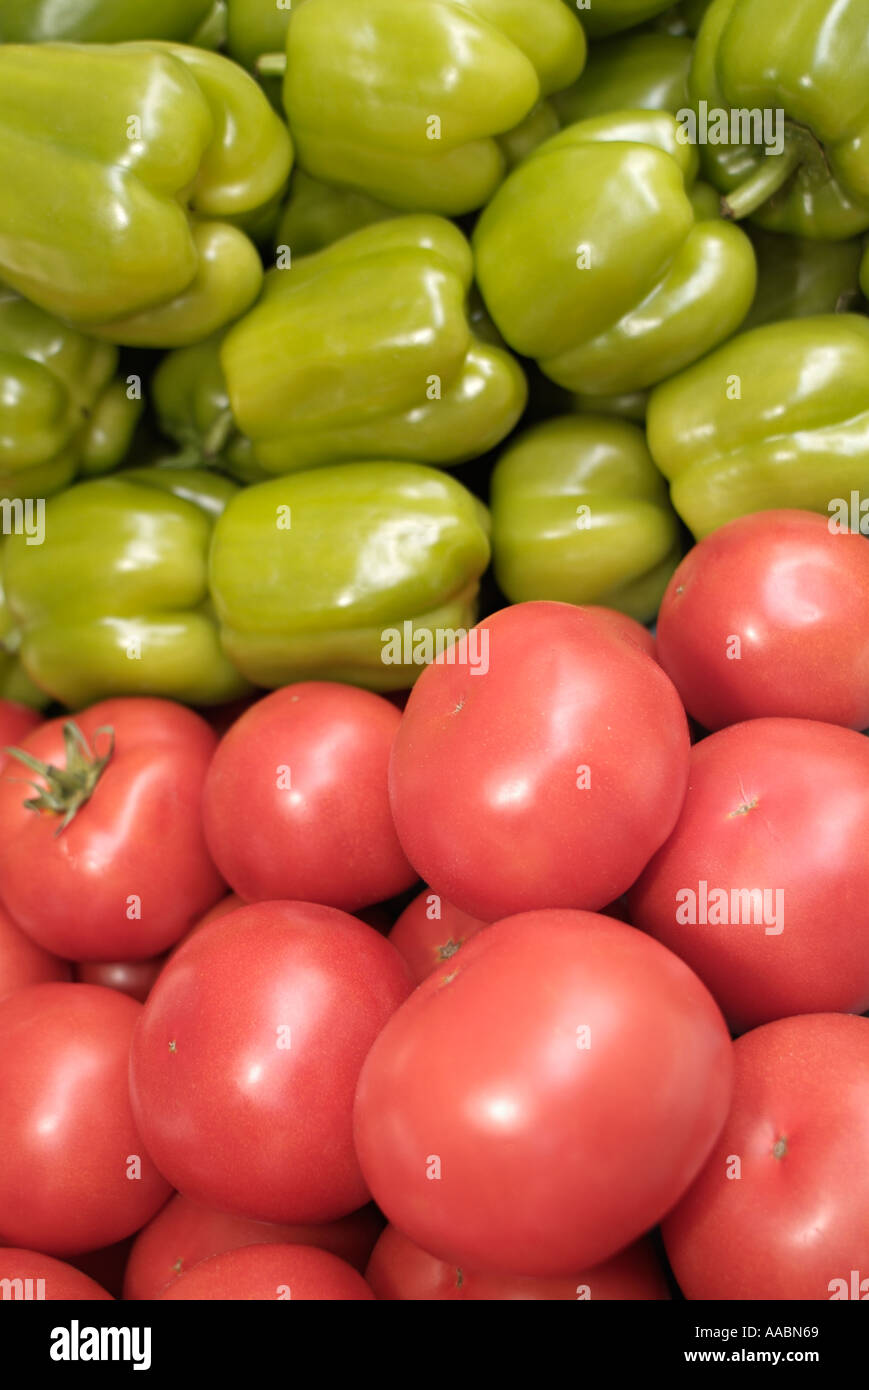 Tomatoes and Green Peppers on a Market Stall, Close Up. Stock Photo